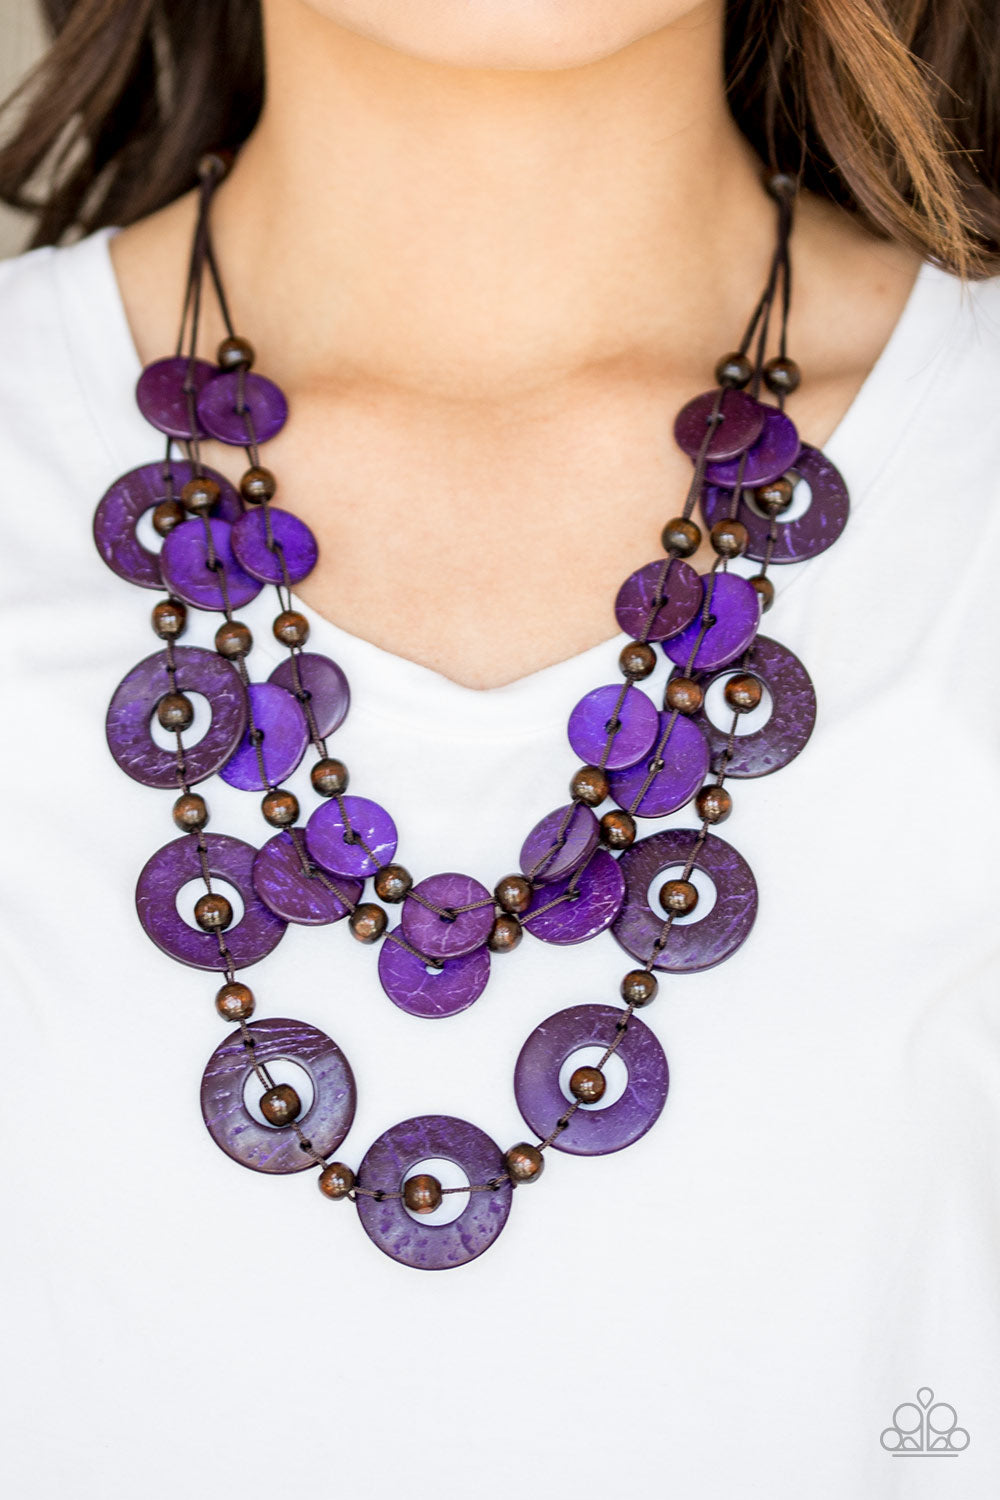 Catalina Coastin - Purple and Brown Wooden Bead Necklace - Paparazzi Accessories